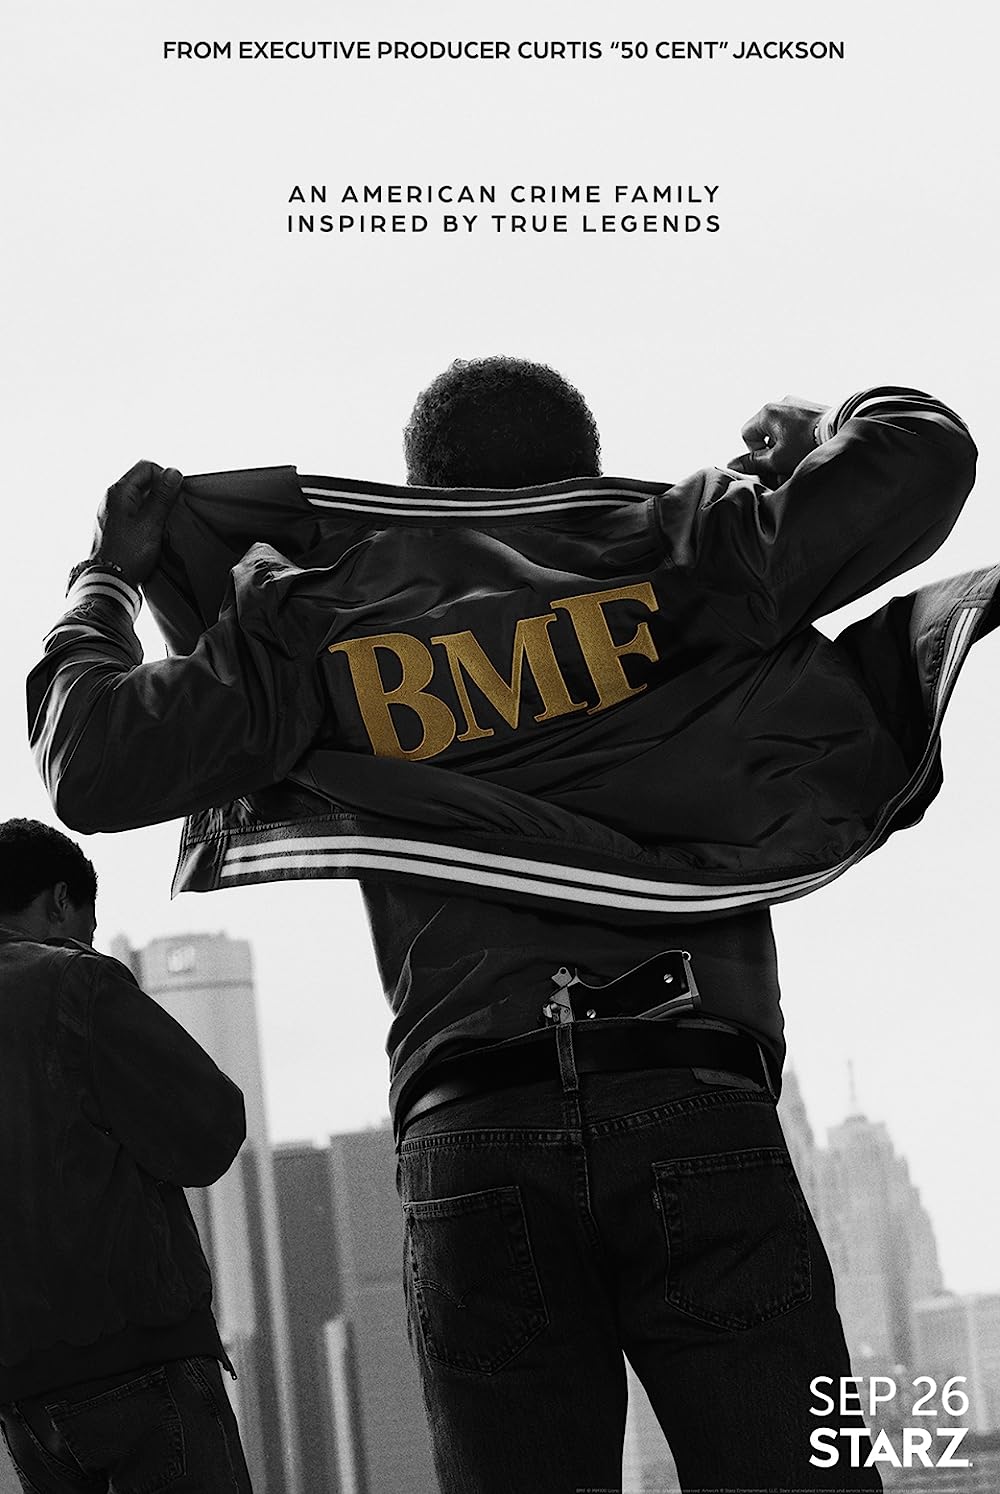 BMF poster